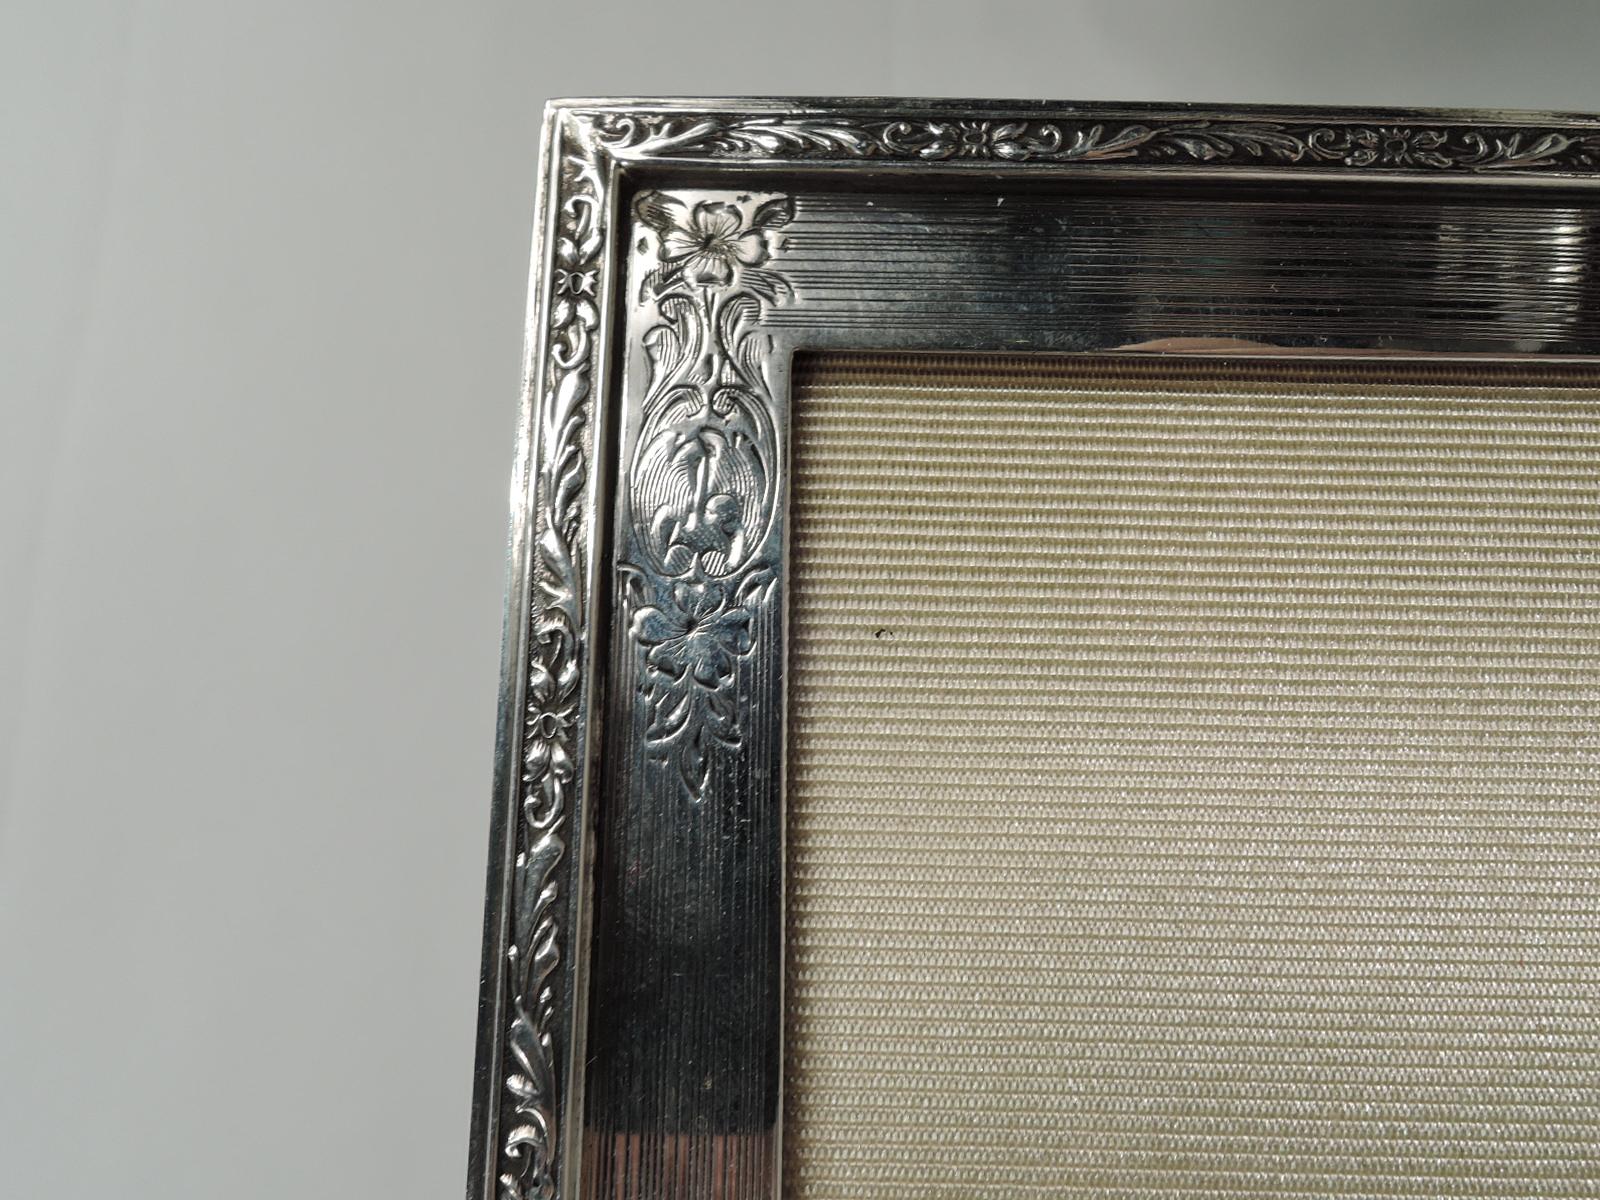 Edwardian Classical sterling silver picture frame. Made by Birks in Canada in 1954. Rectangular window in flat surround with engine-turned wraparound lines and engraved flowers and scrolls; Raised rim with low-relief flowers and scrolls. Central